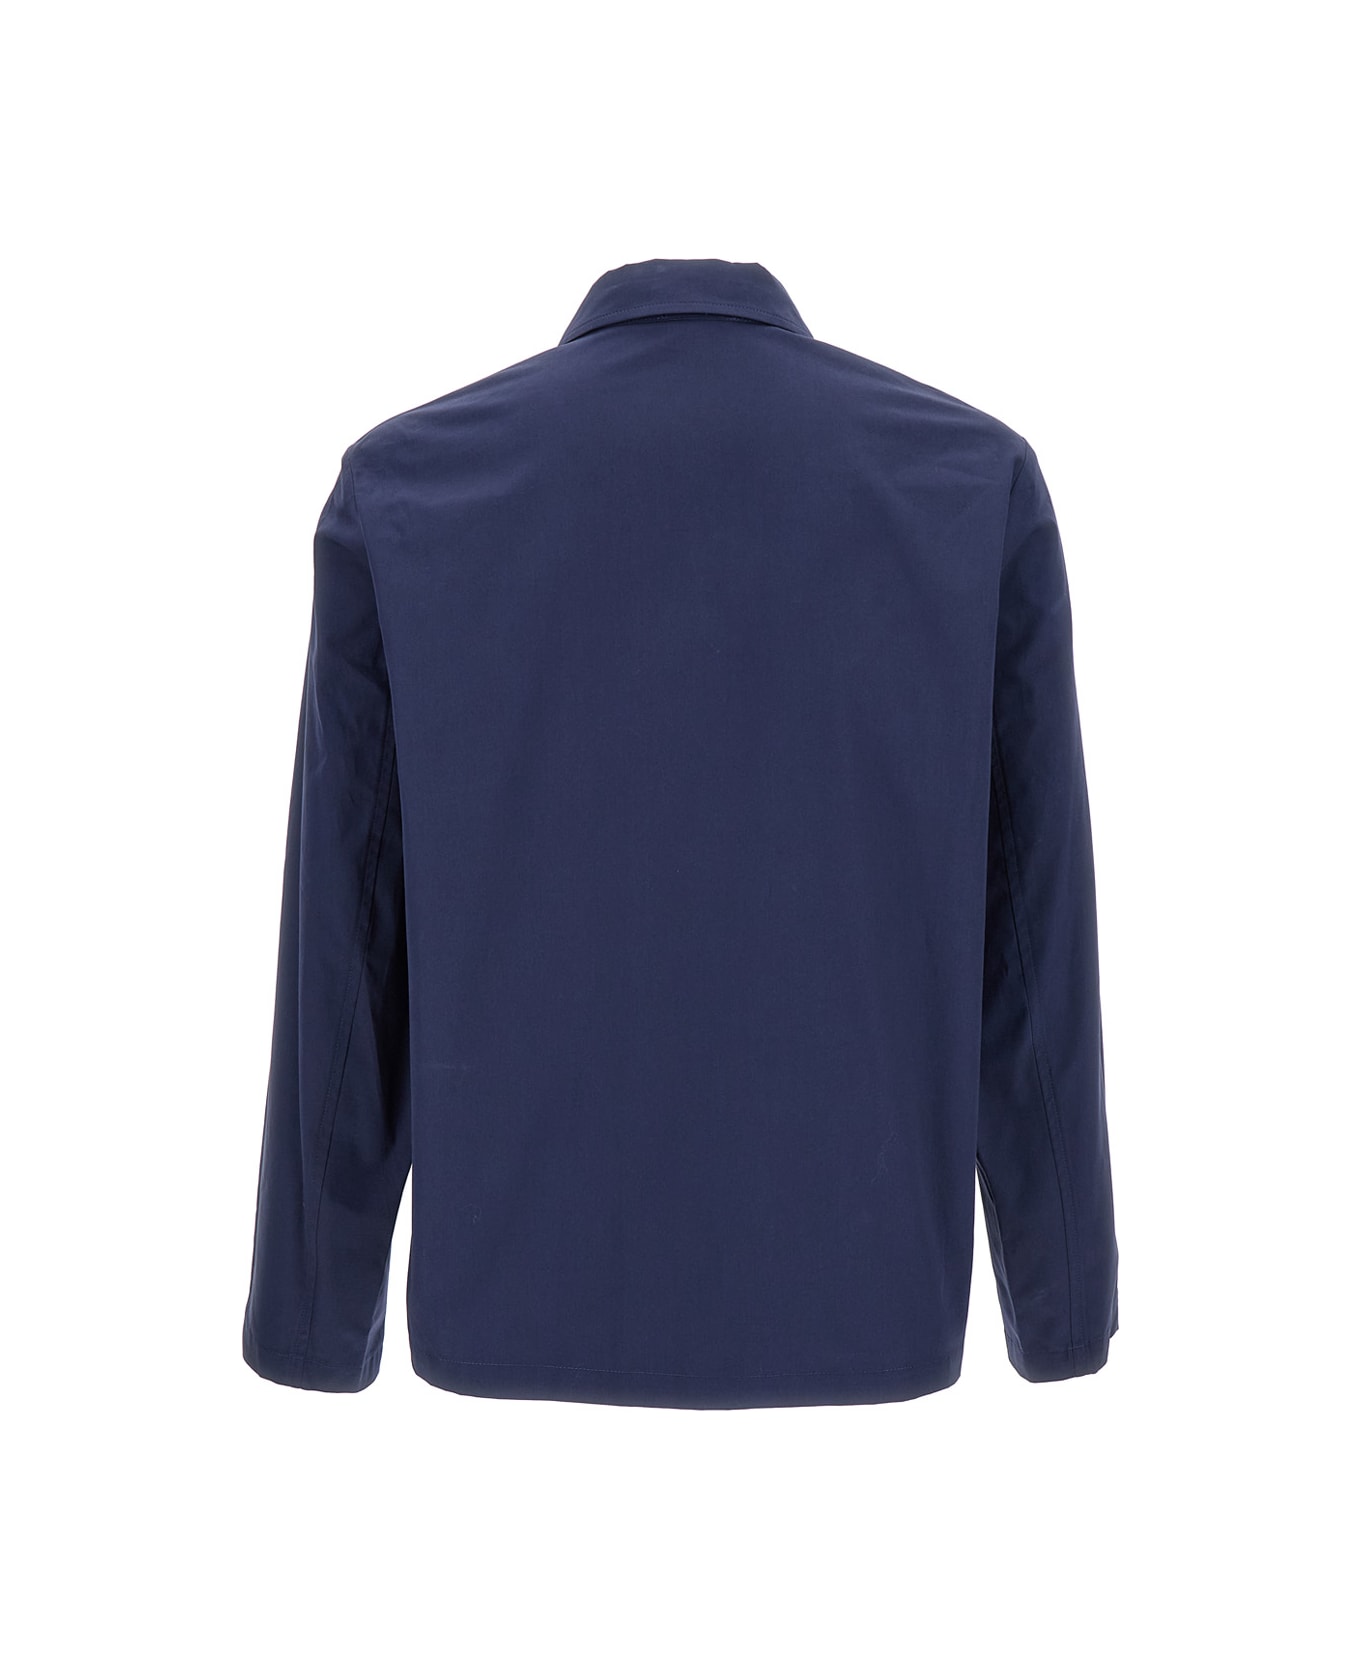 A.P.C. Jacket-shirt With Front Pocket - Blu シャツ